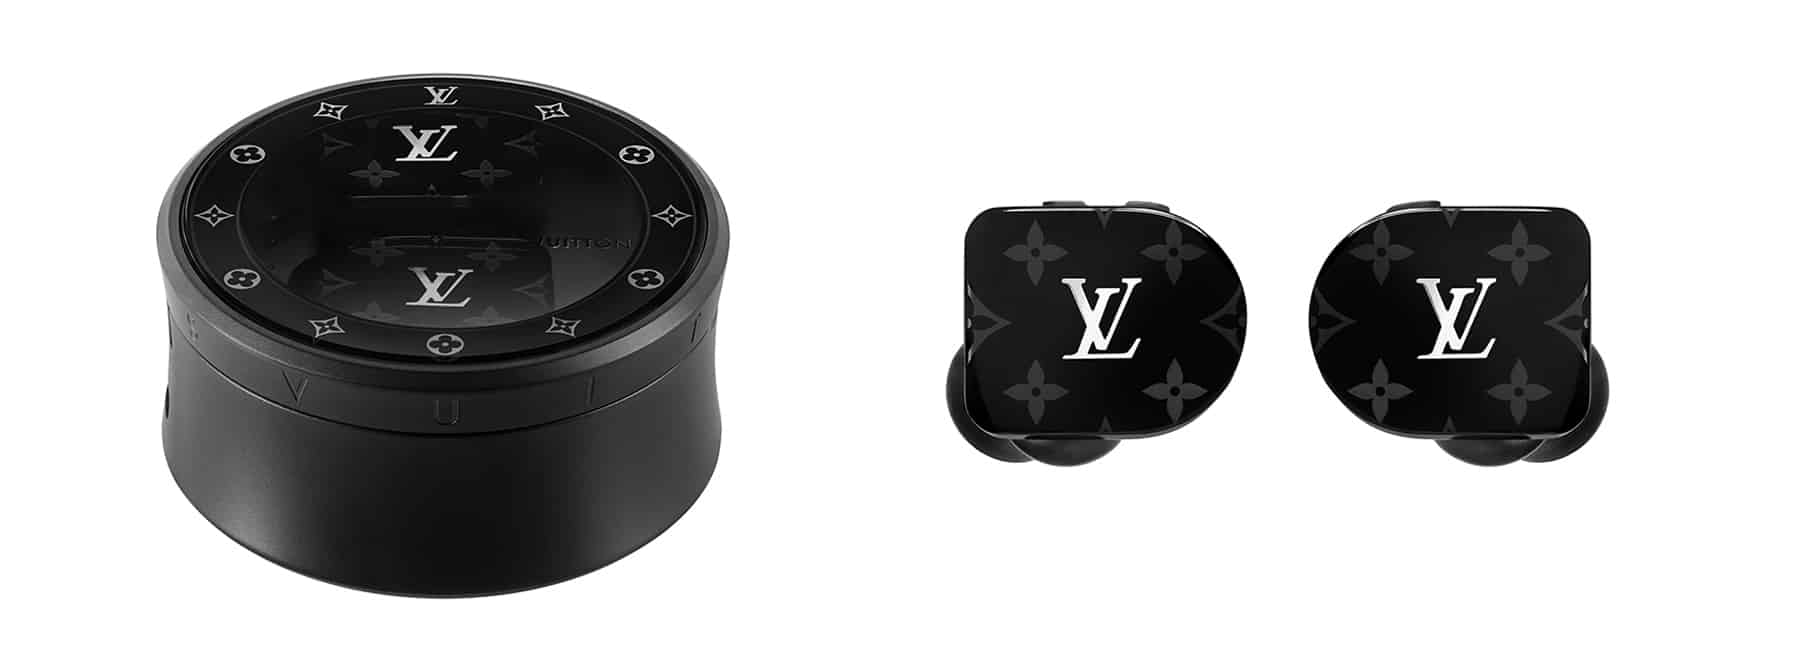 These Louis Vuitton-branded earbuds are more expensive than an